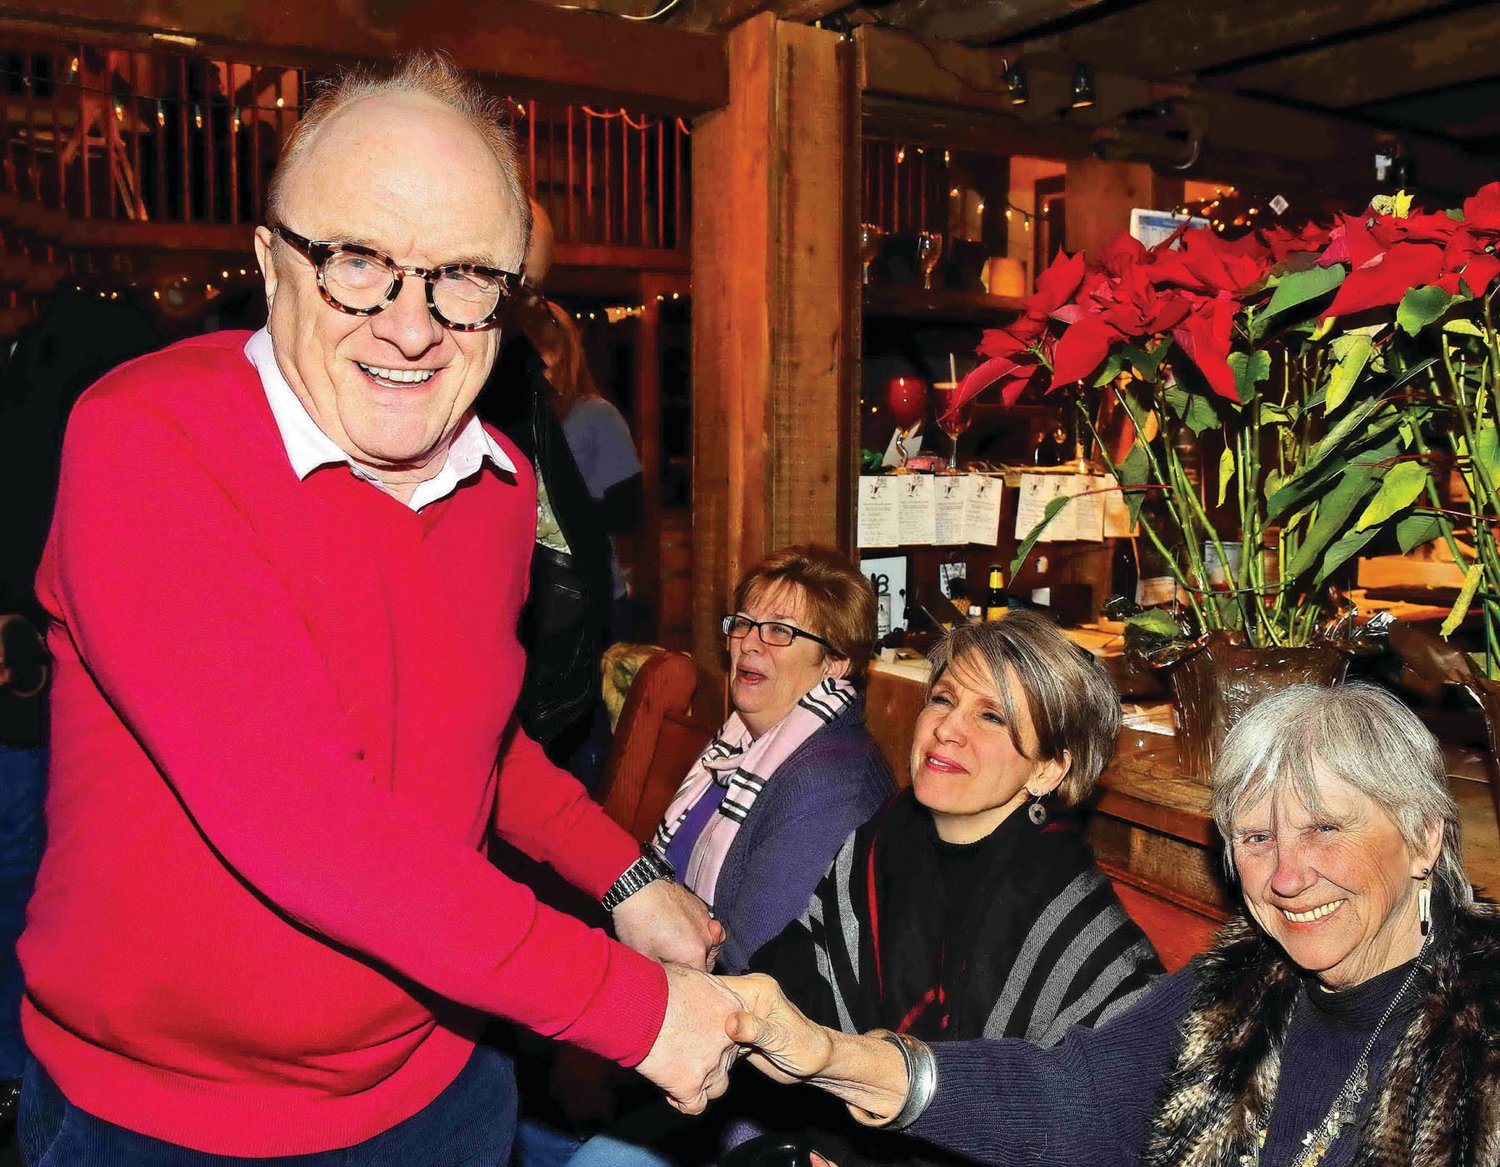 Singer Peter Asher shakes hands with Cynthia Wuthrich at the pre-concert meet and greet. Photograph by Gordon Nieburg